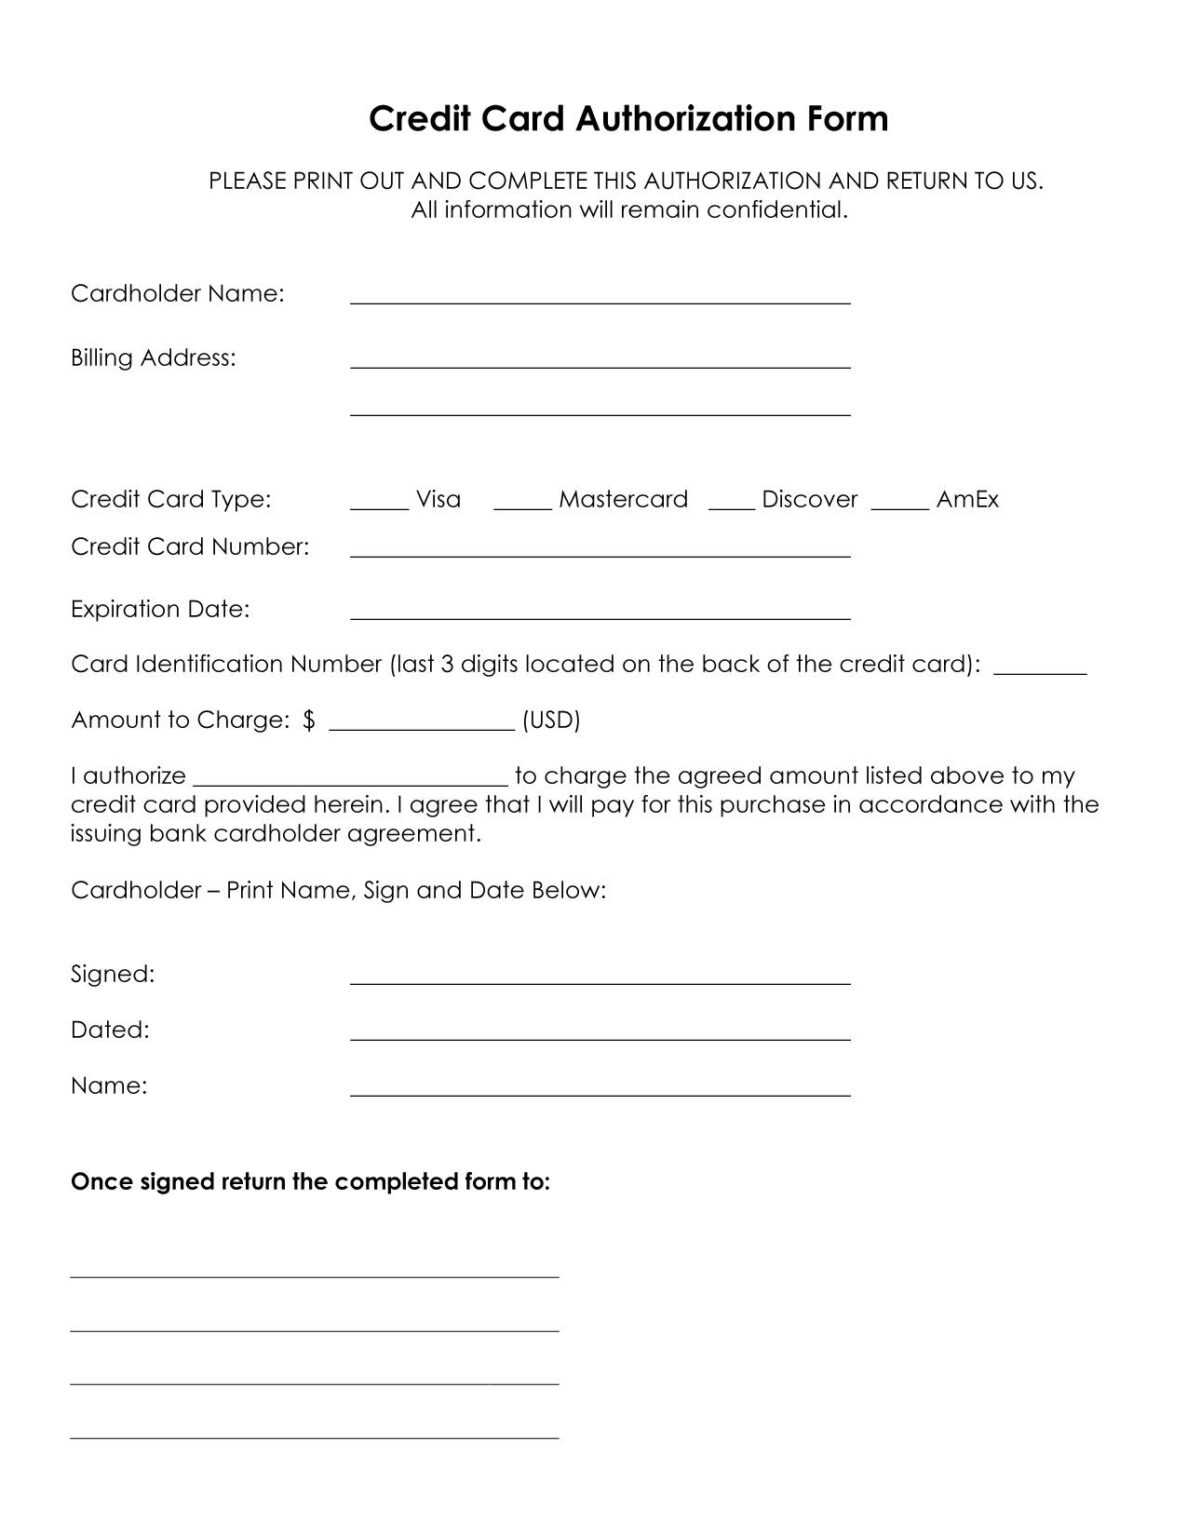 Credit Card Authorization Form Template Pdf Colonarsd7 Regarding Credit Card Authorisation 9096